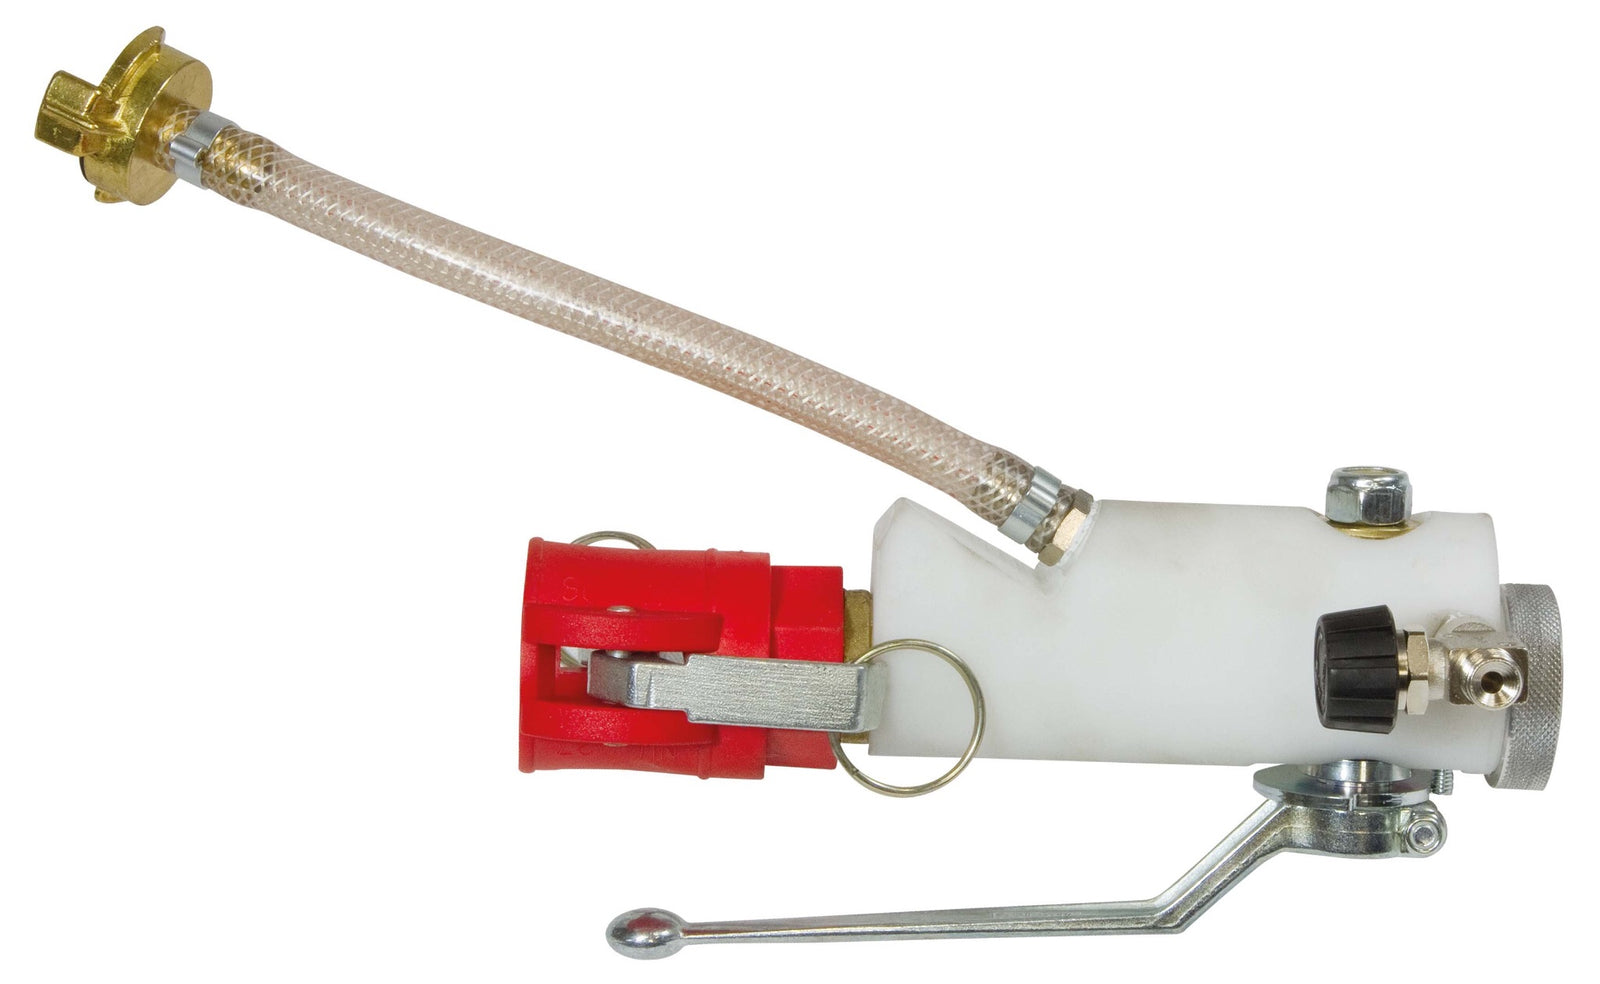 IMER SPRAY GUN ONLY for Fine Coatings / Waterproofing / Paints / Acrylic Stucco - for IMER Small 50 and Koine 35 Item# 1107011